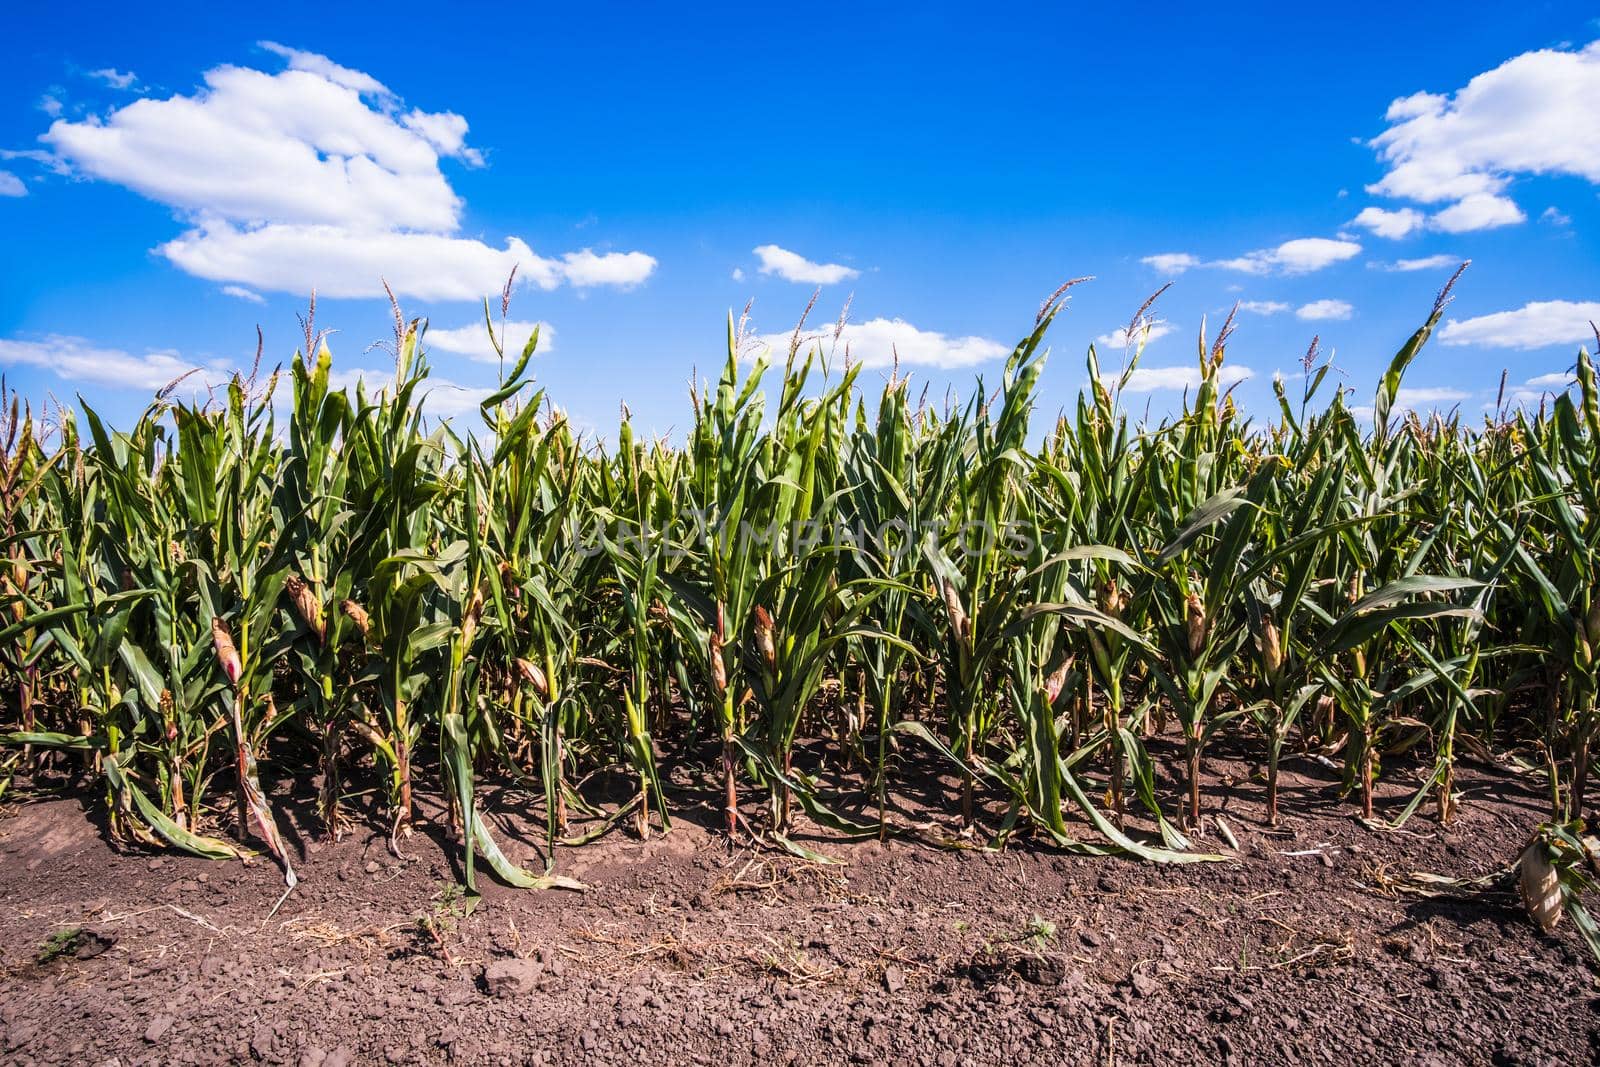 Corn field is damaged and drying because of long drought in summer.